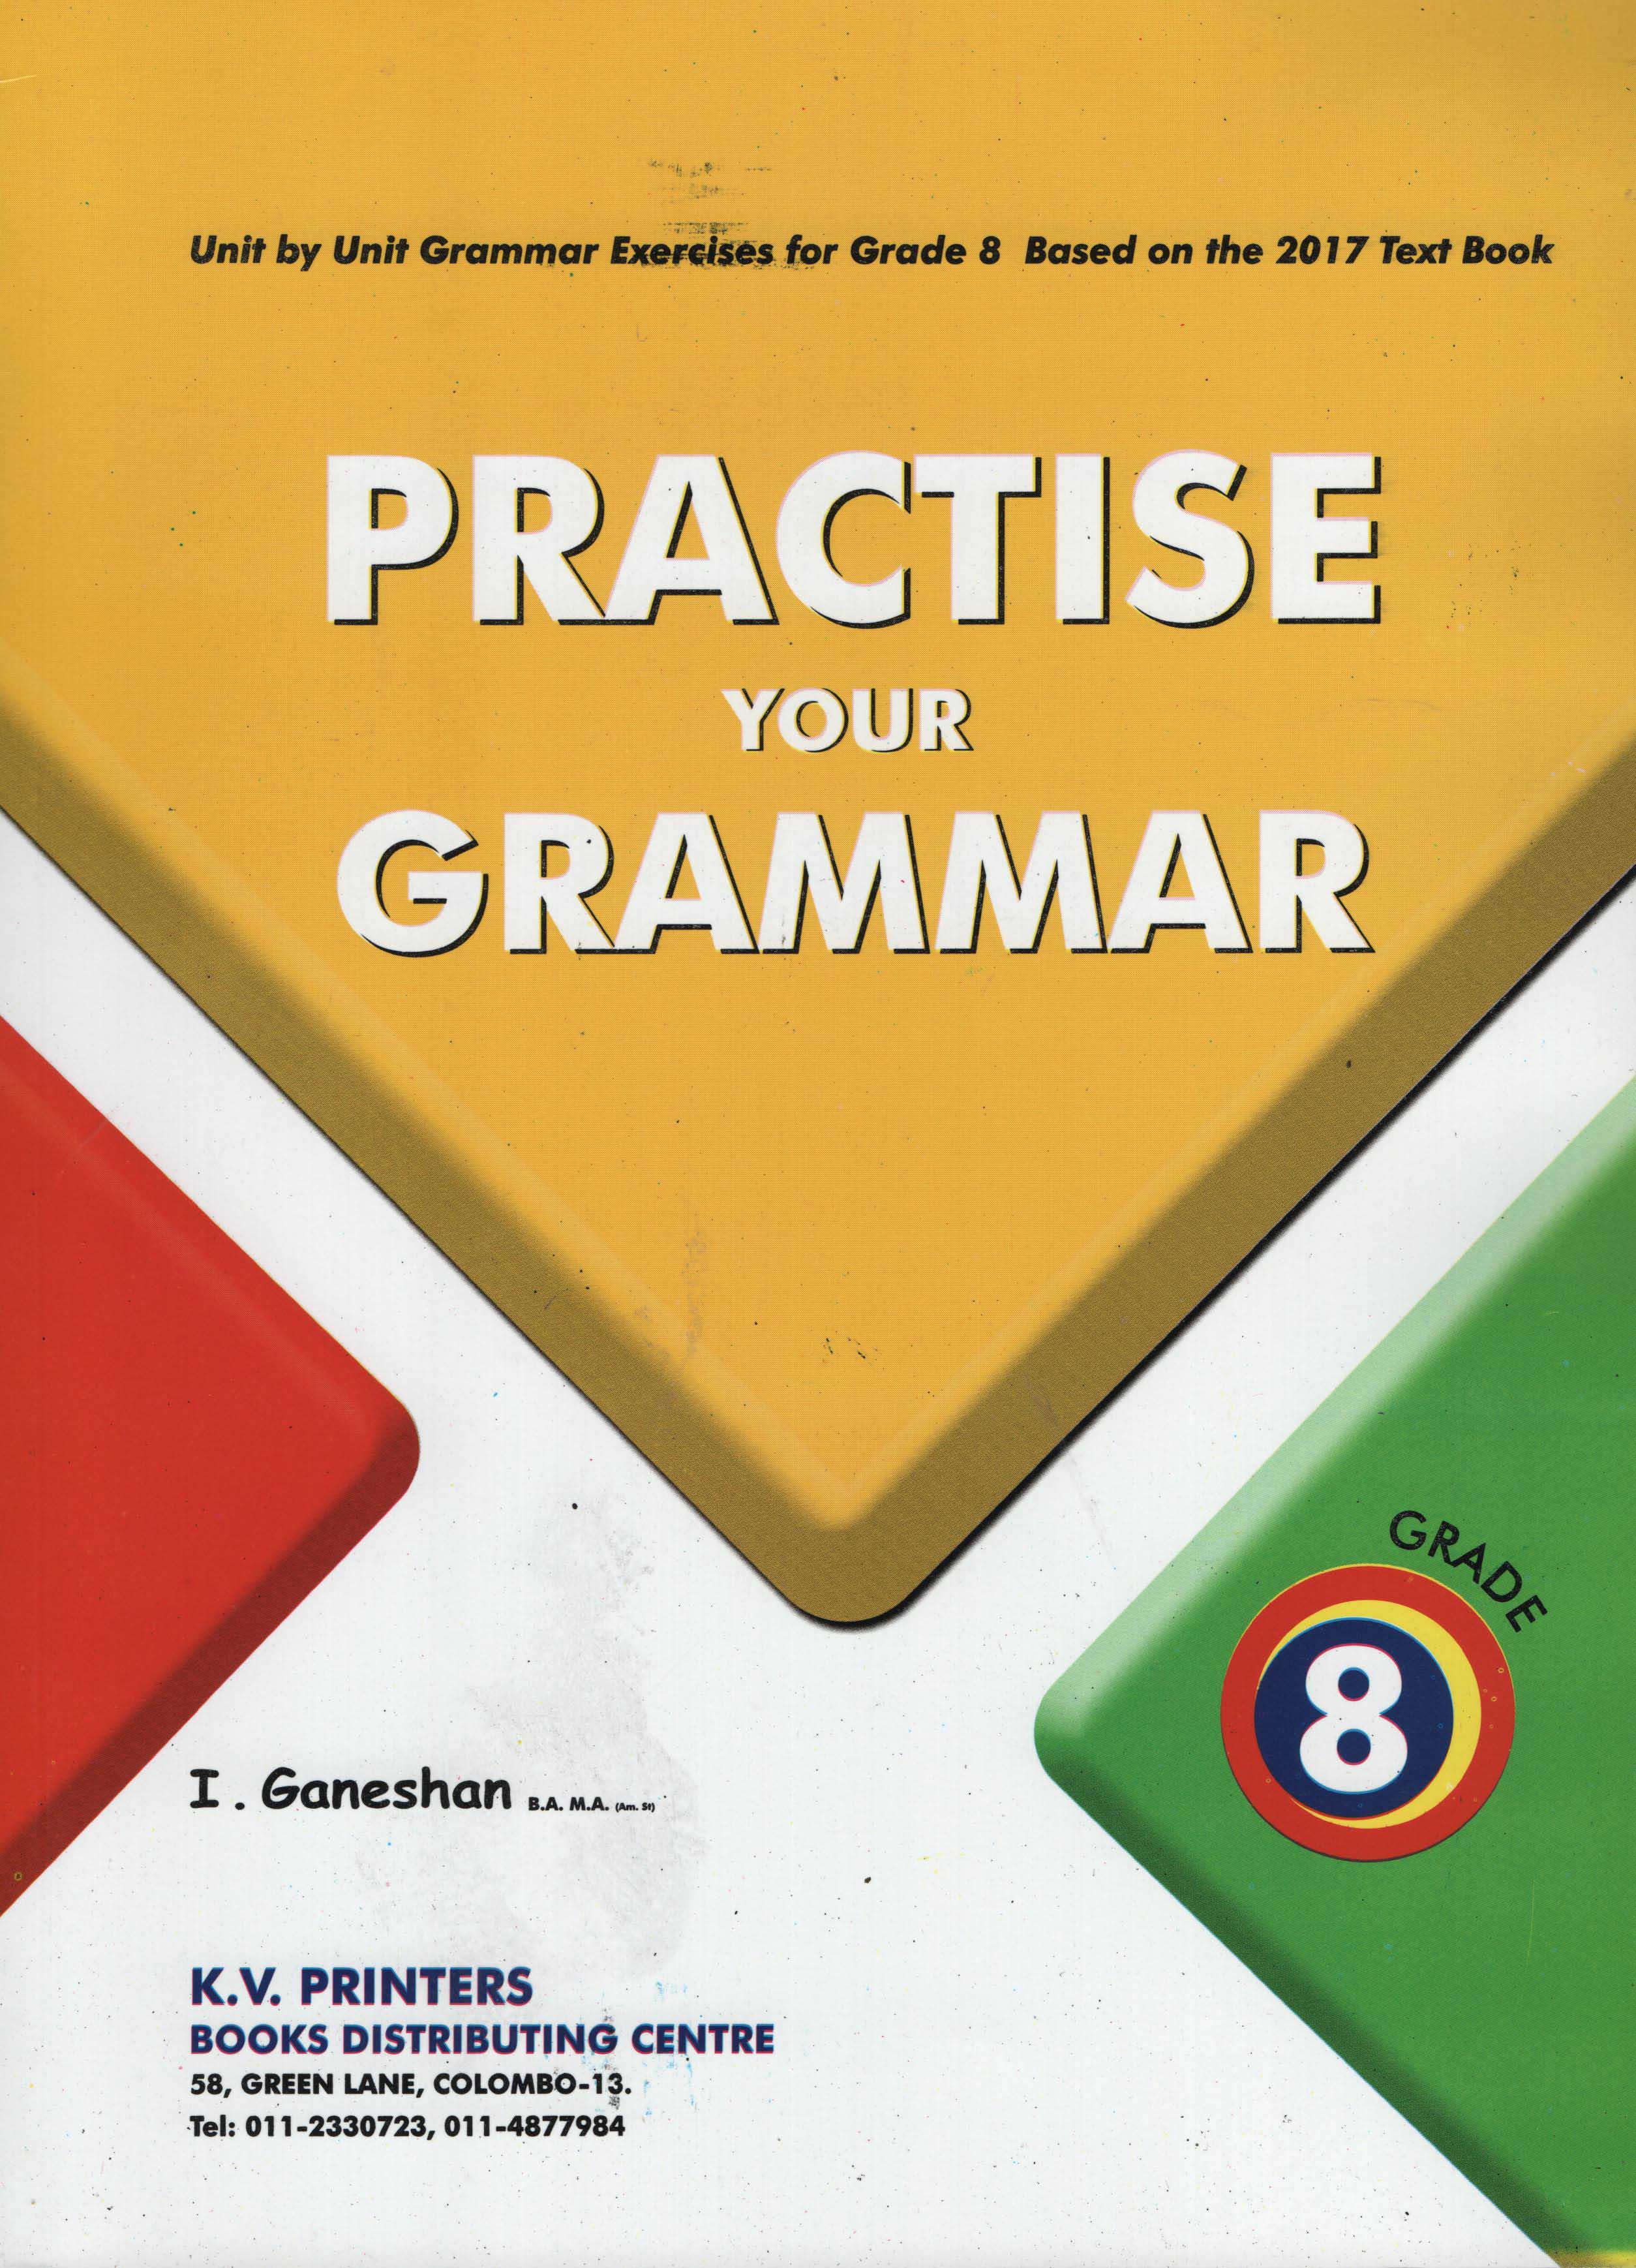 Practise Your Grammar for Grade 8